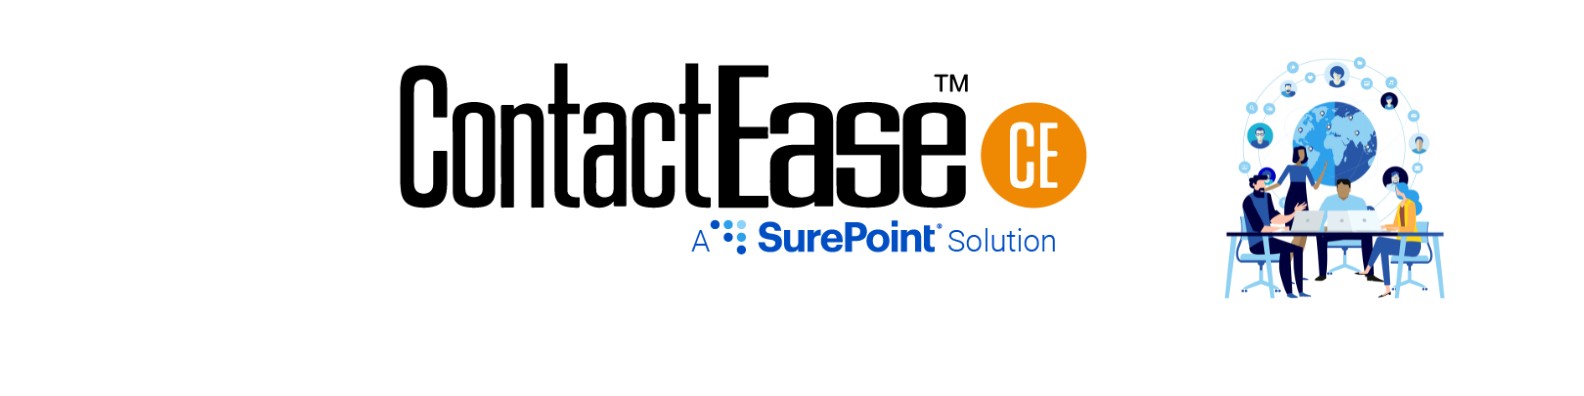 ContacteEase CRM, A SurePoint Solution ContactEase CRM, A SurePoint Solution